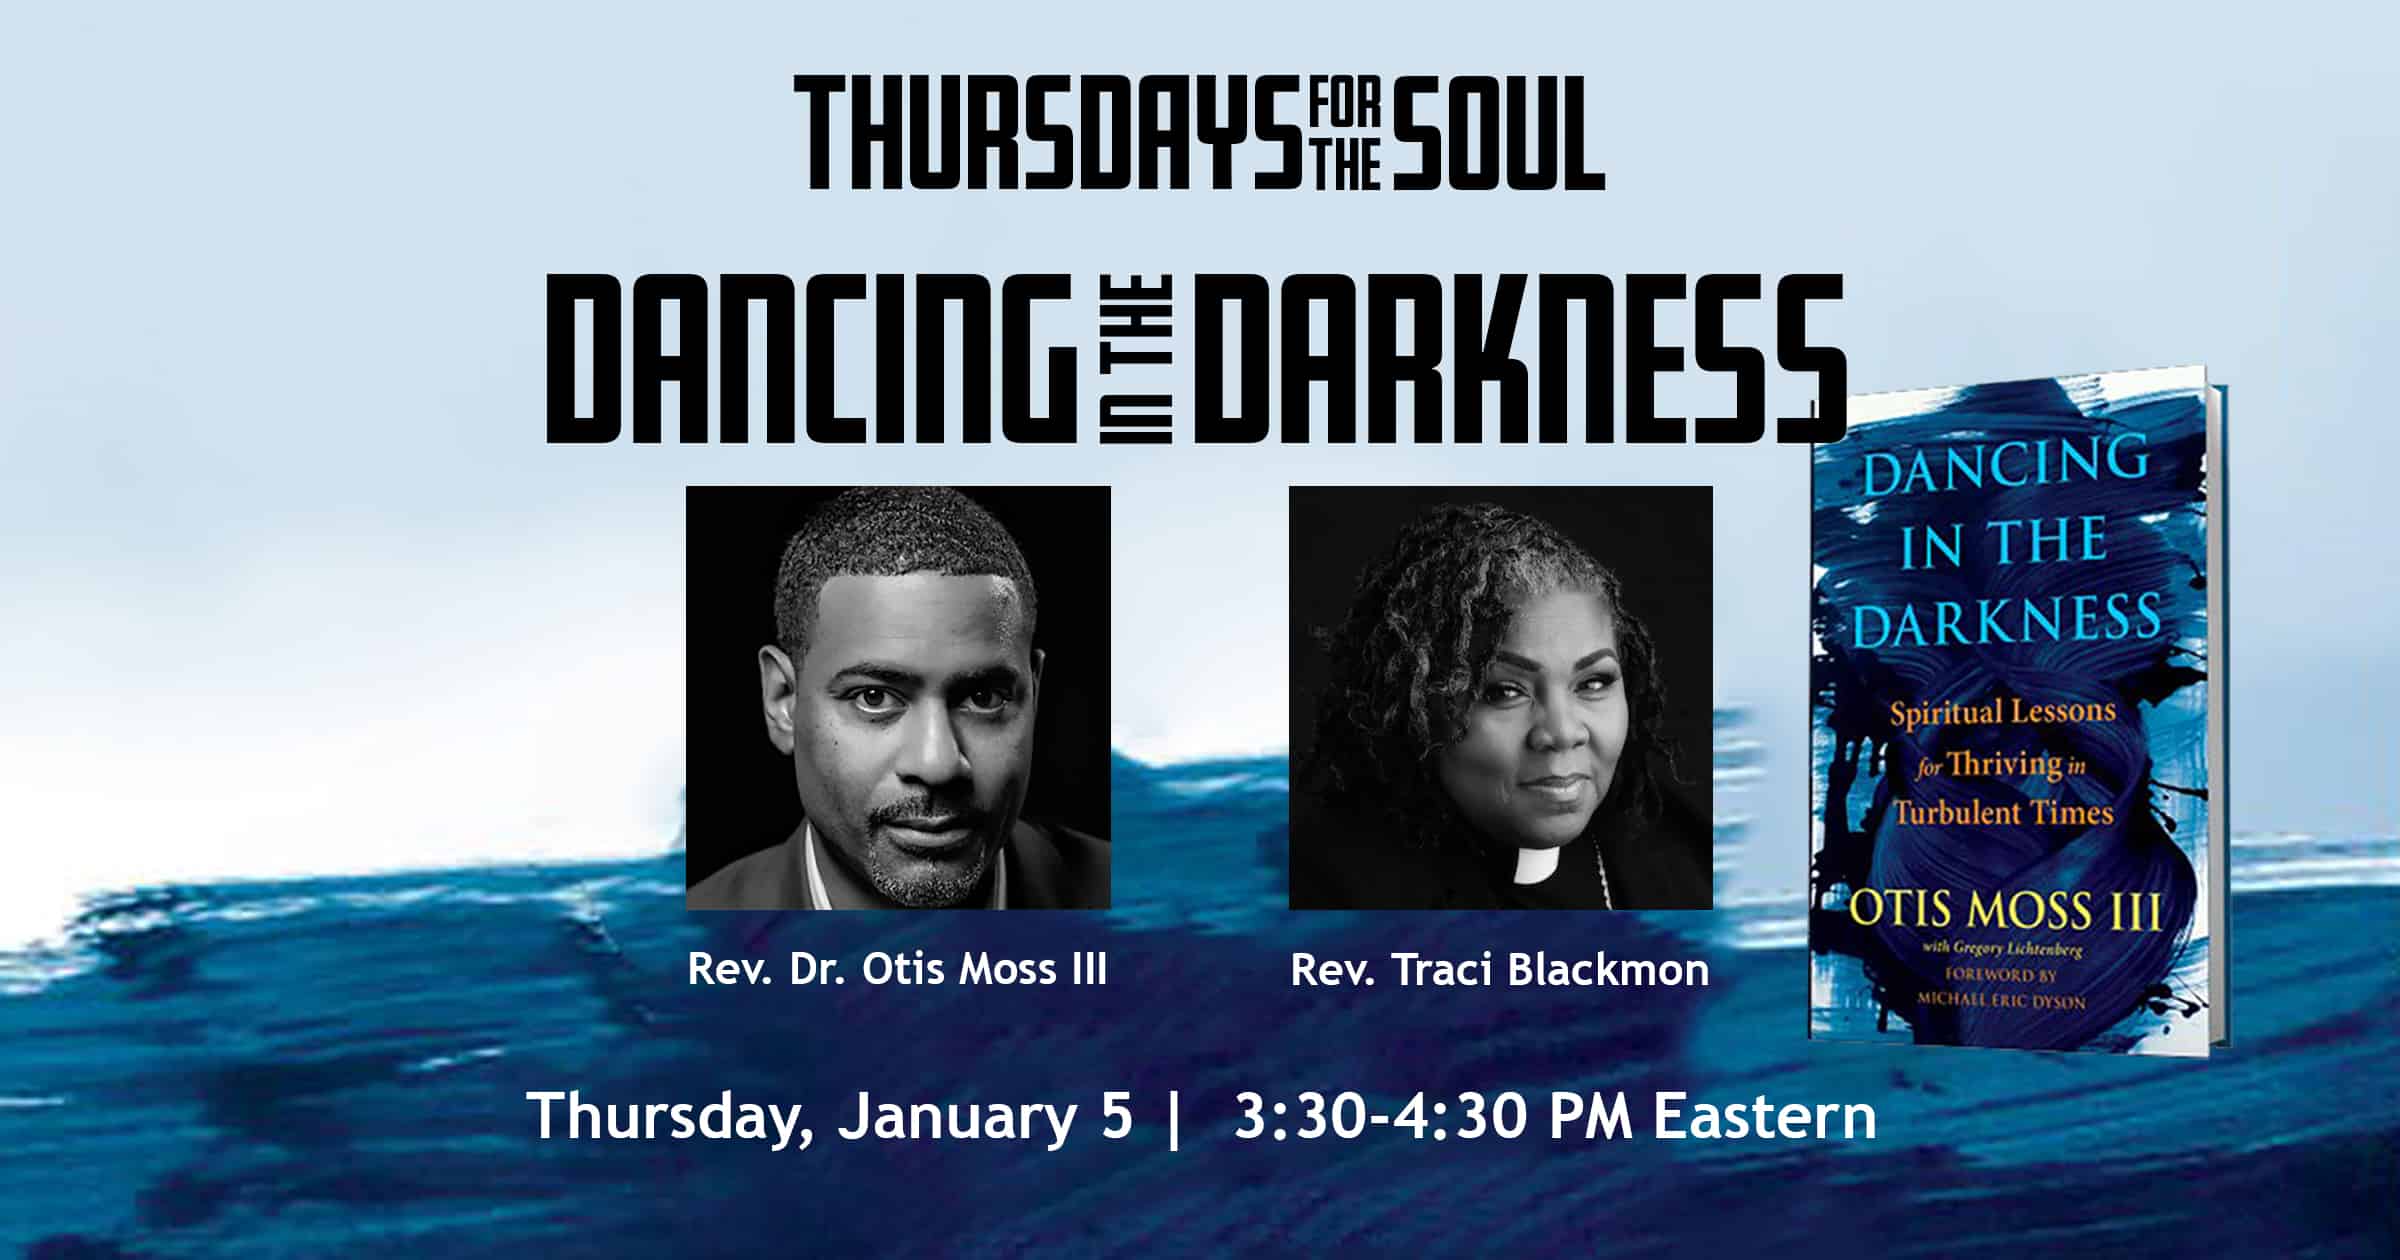 ‘Reclaim the dance’ as changemakers for justice, Otis Moss lll urges in webinar, book